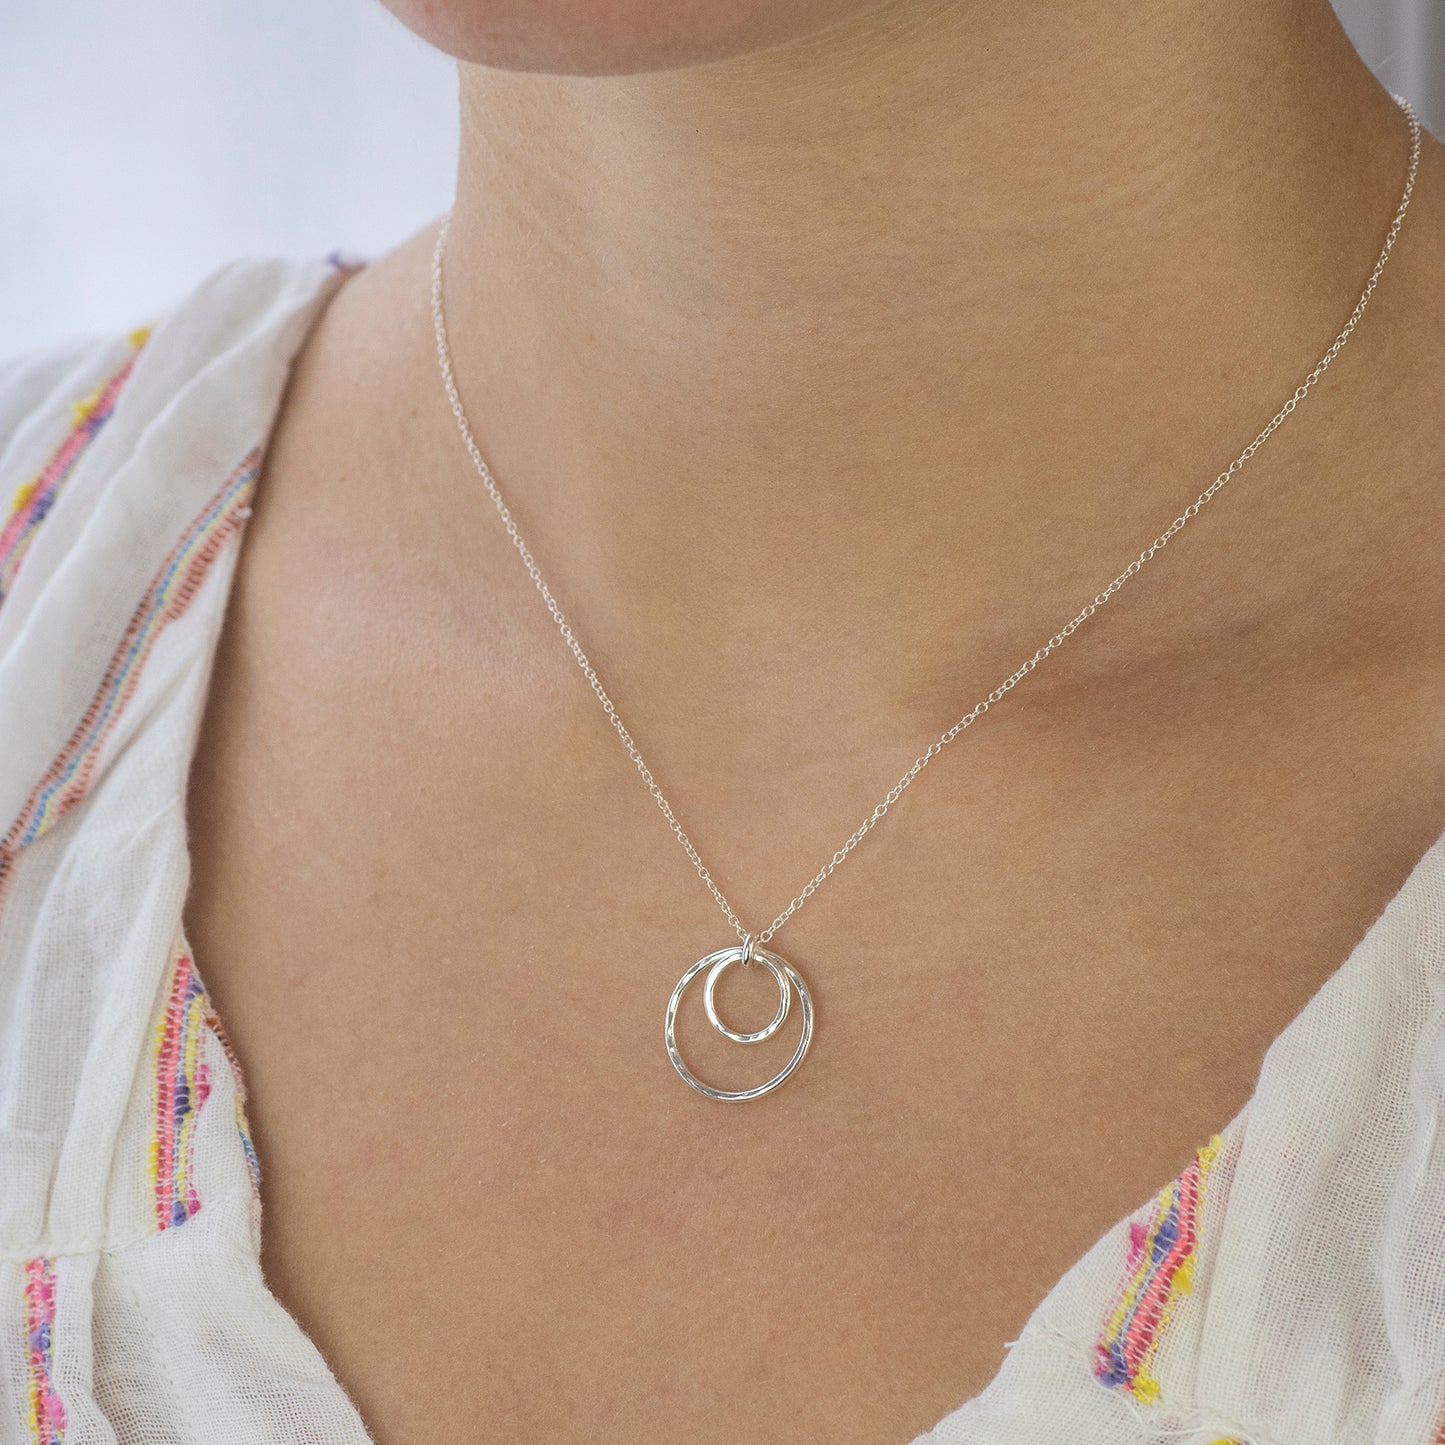 Gift for Quinceañera - Forever Encircled with Love Necklace - Silver & Gold